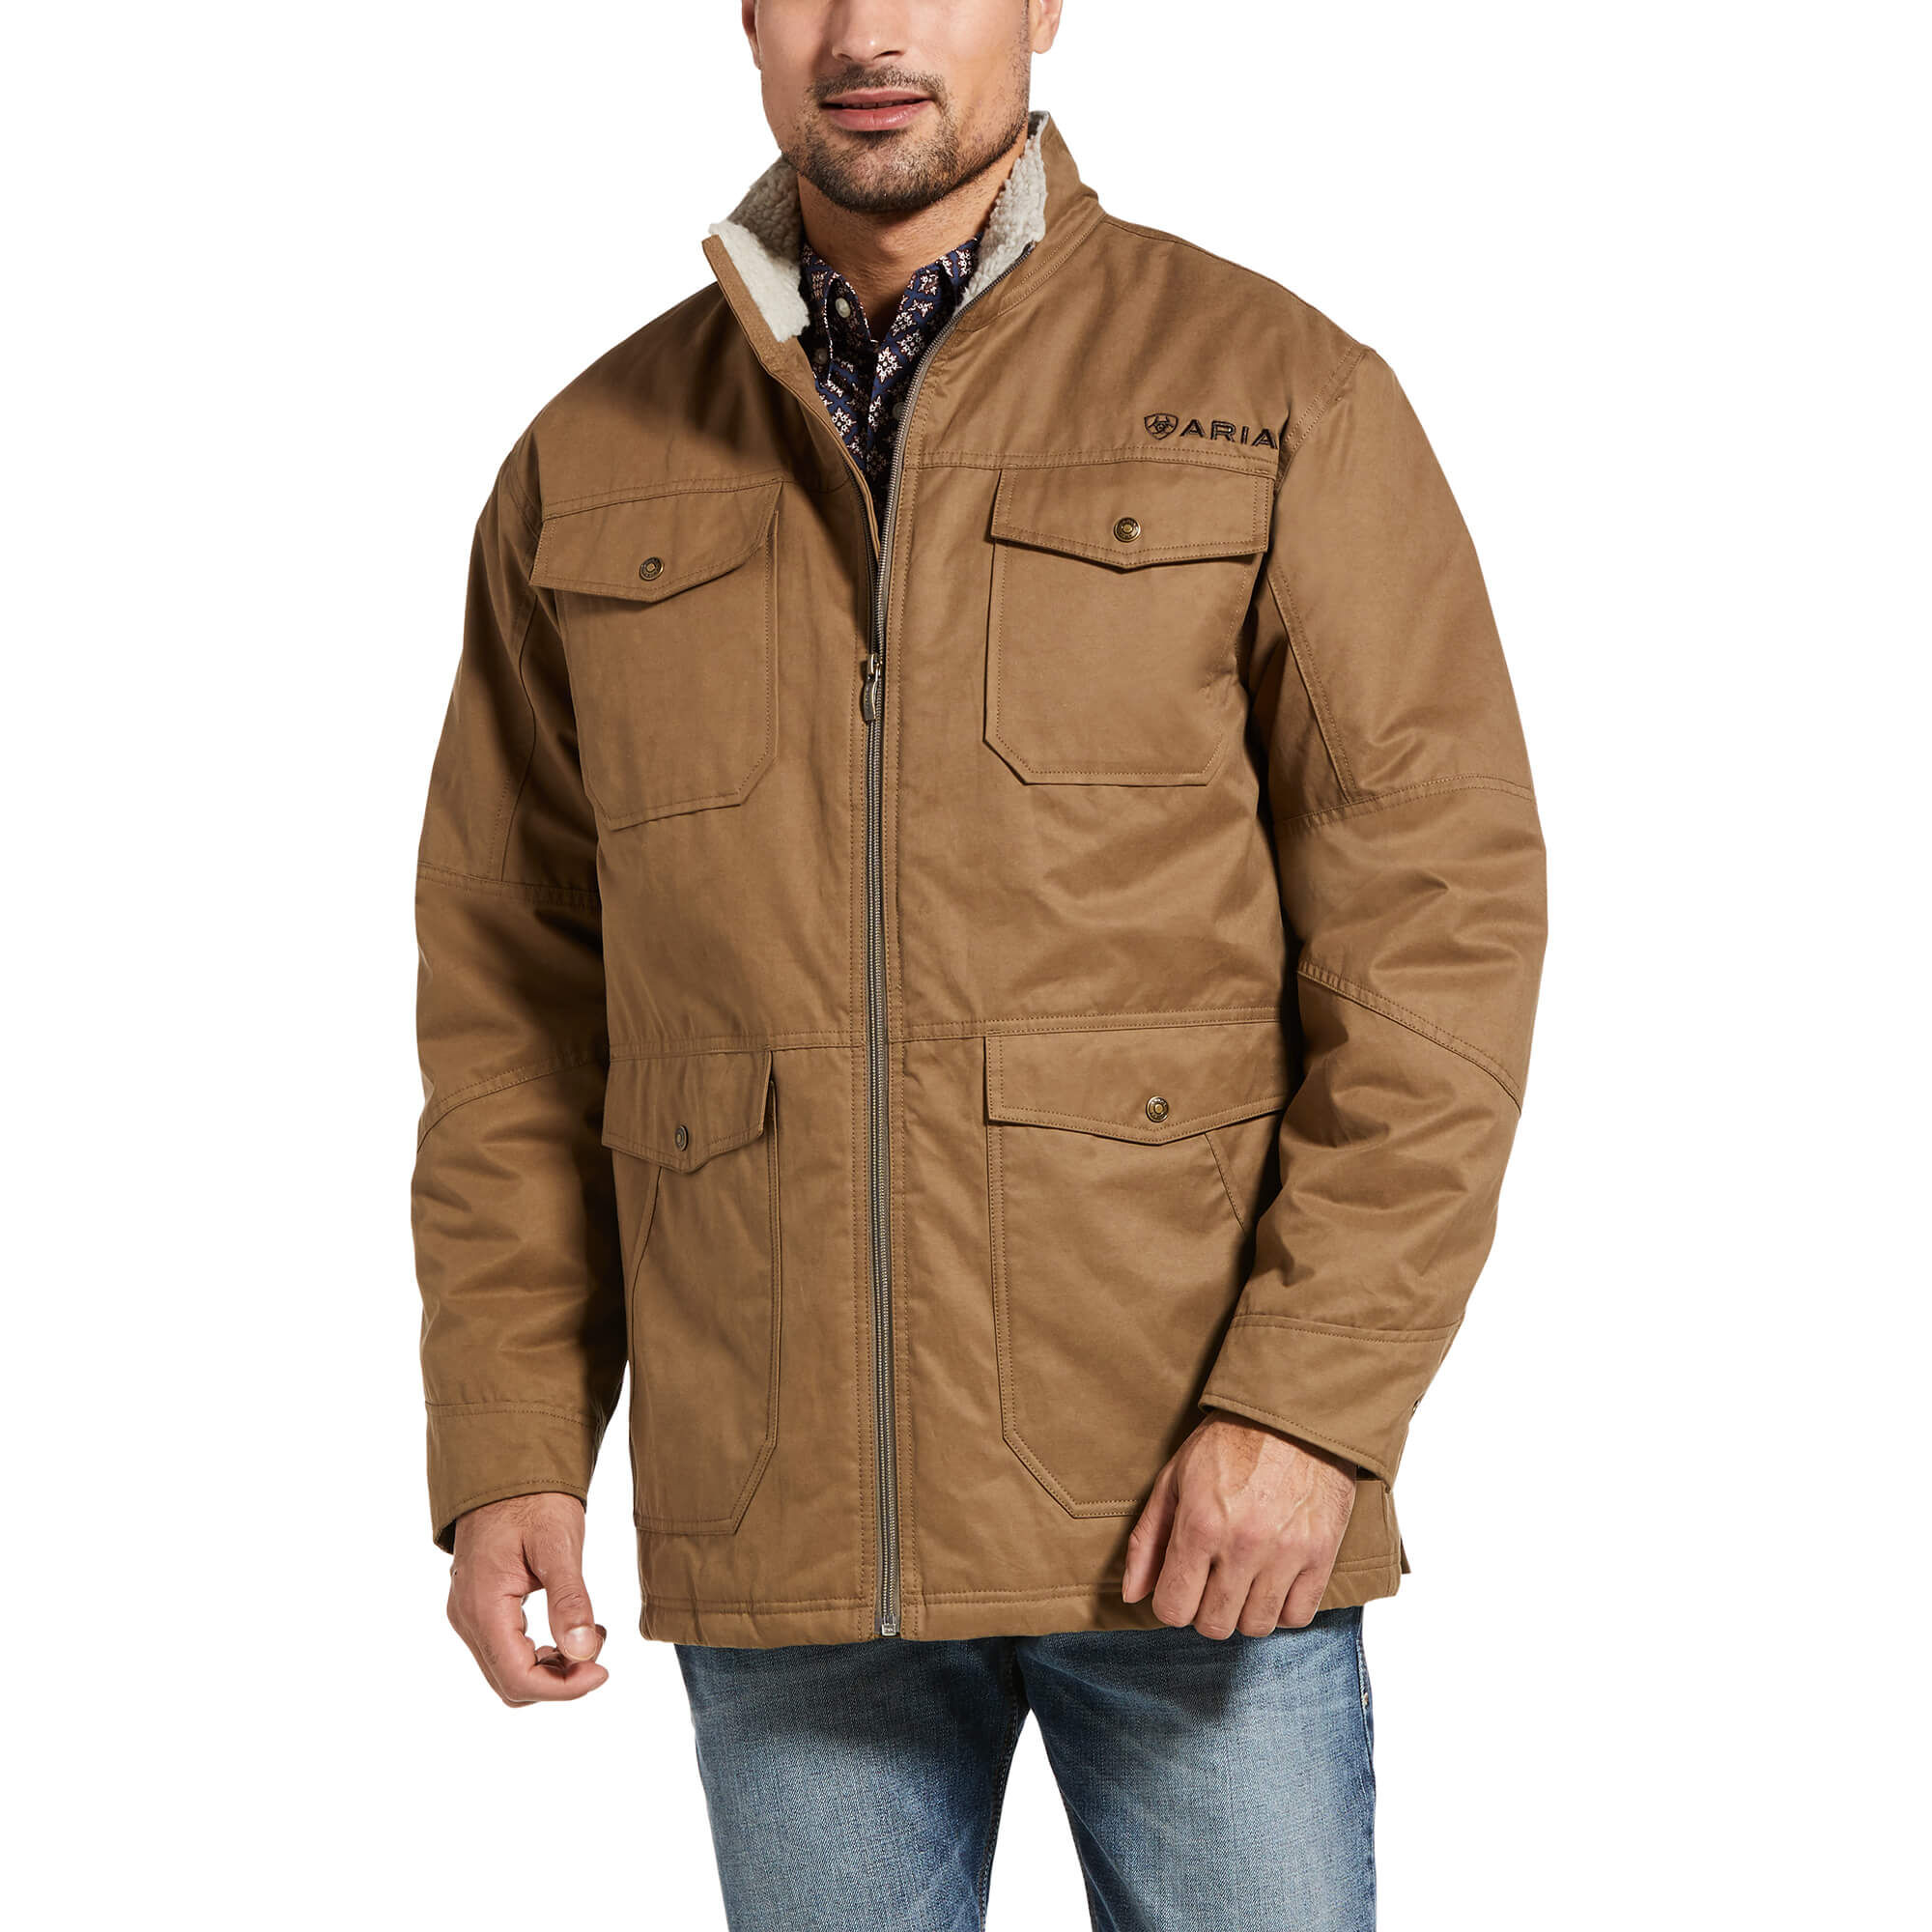 Men's Western Jackets and Vests | Ariat